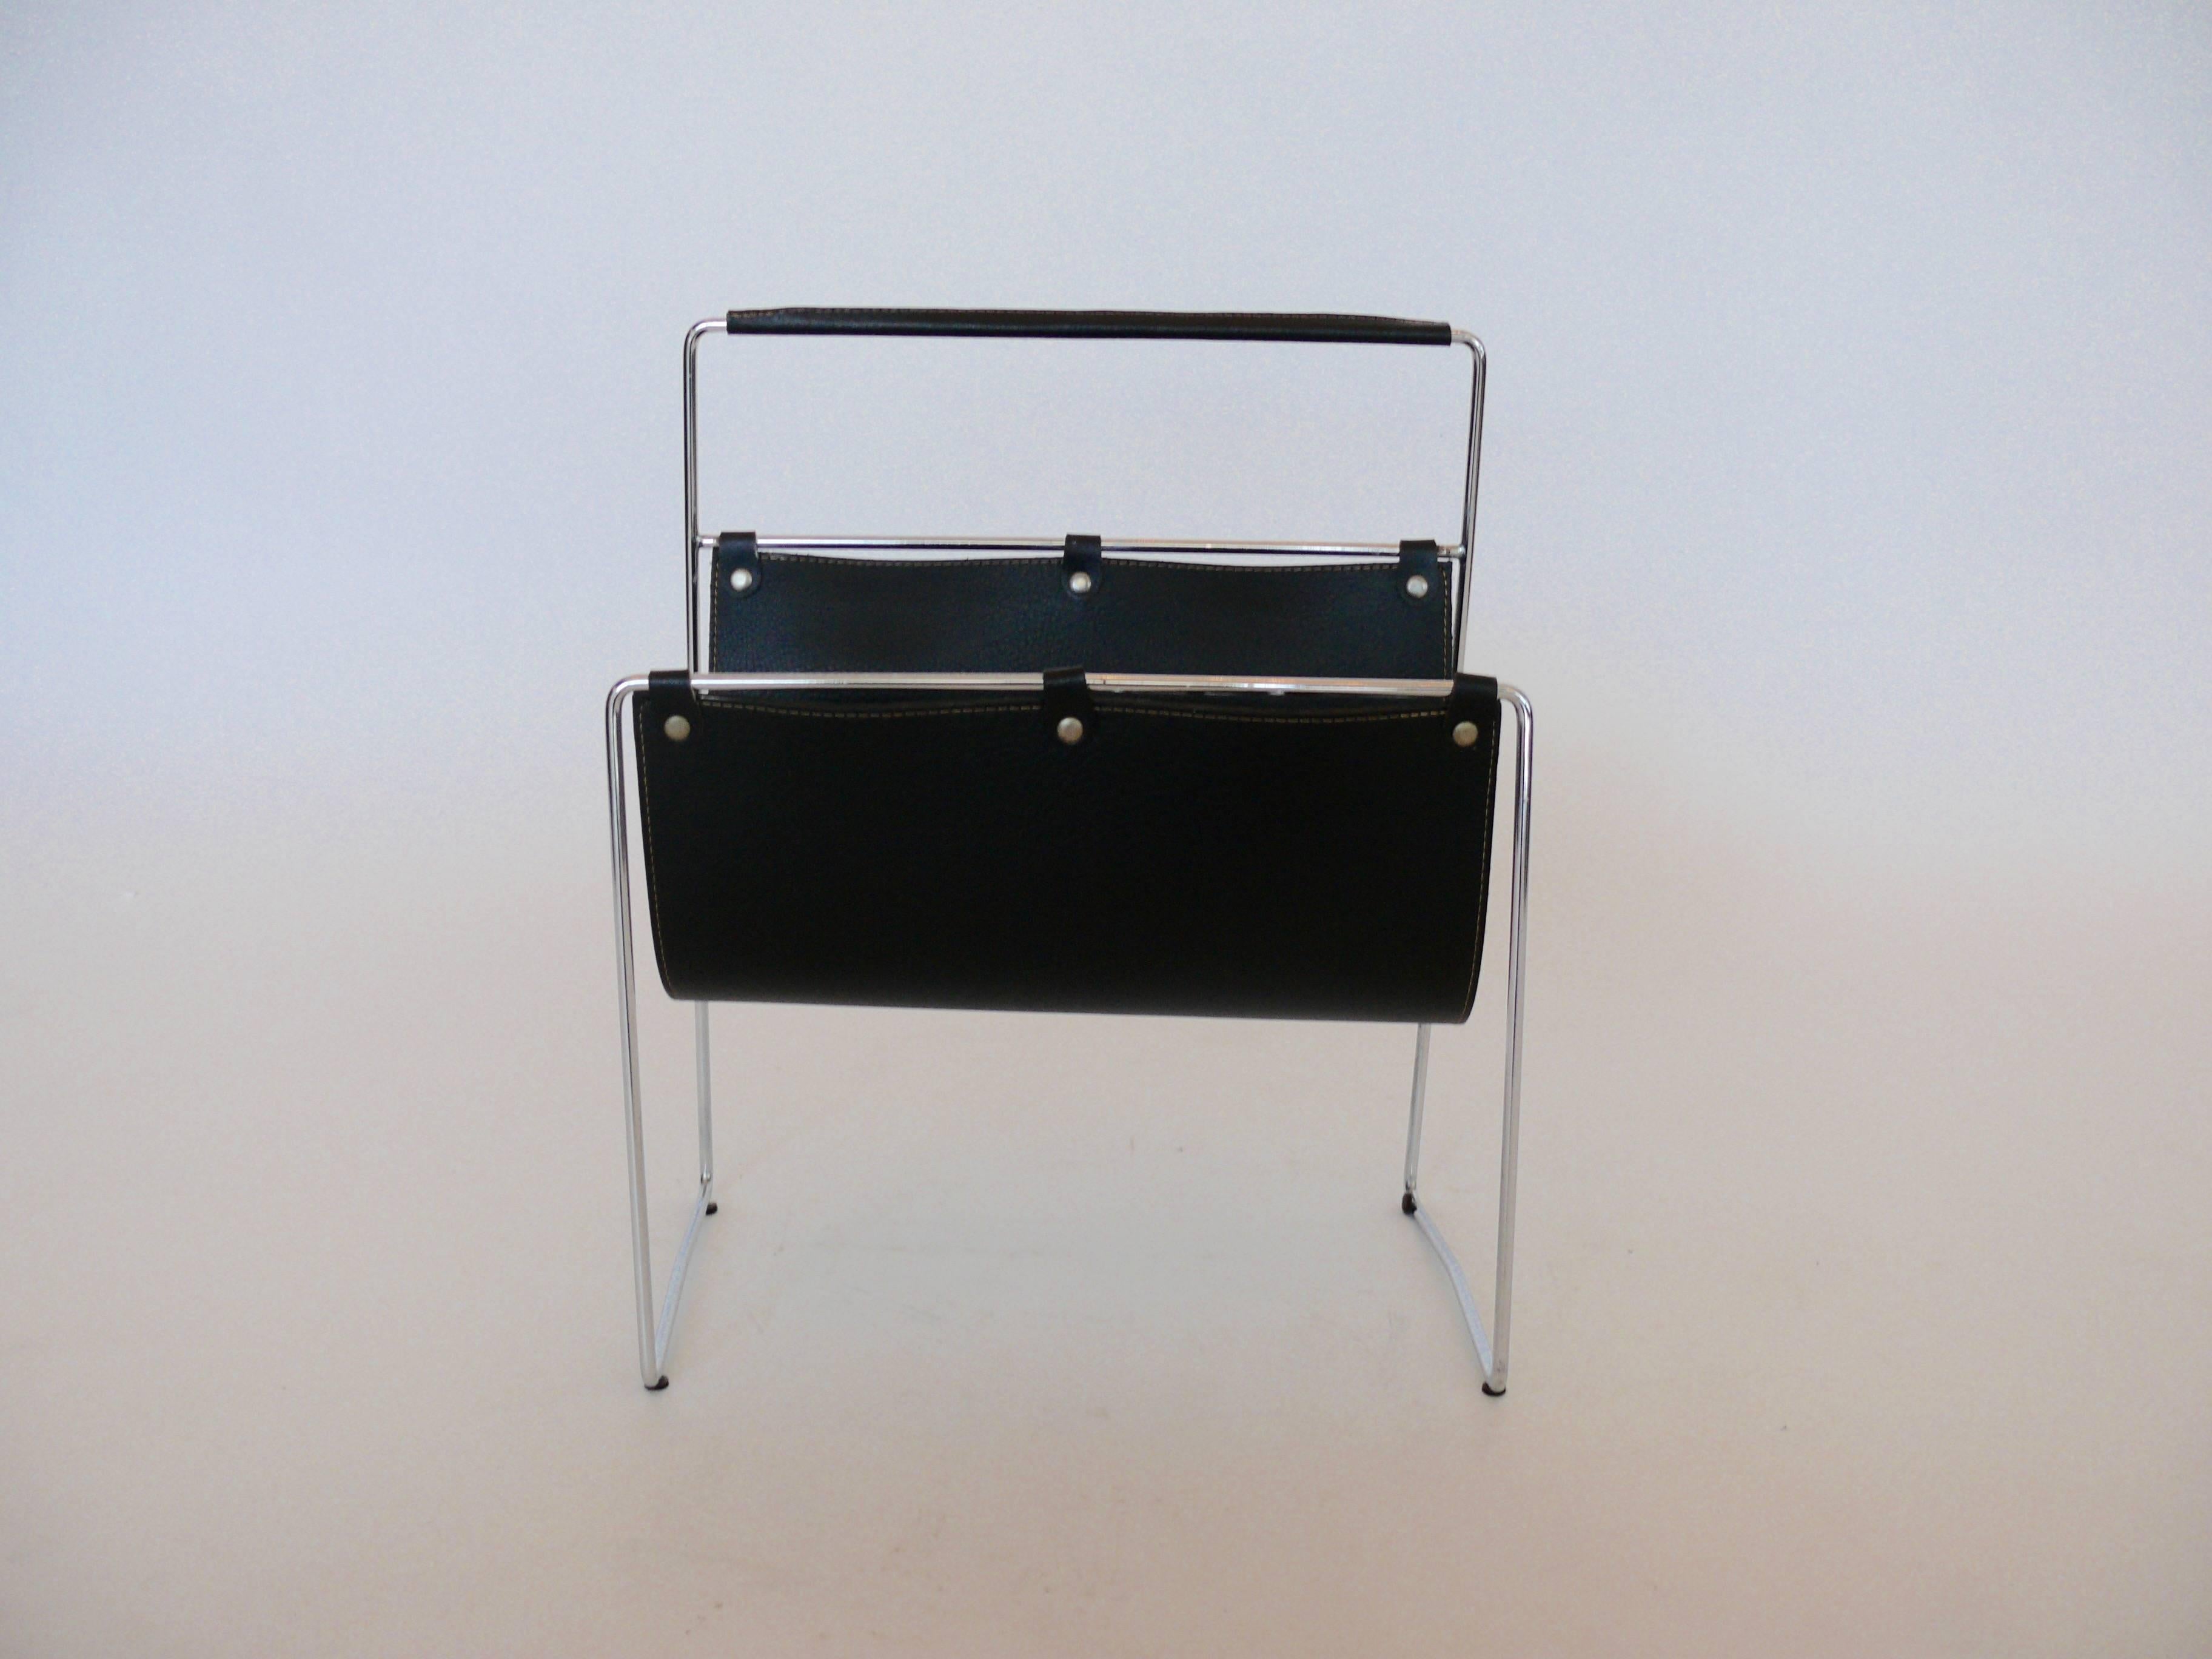 Simple French magazine rack with black leather sling and chrome. Classic Adnet style stitch to leather, with chrome rivets and leather loop detail attaching the sling to the frame. Excellent vintage condition.